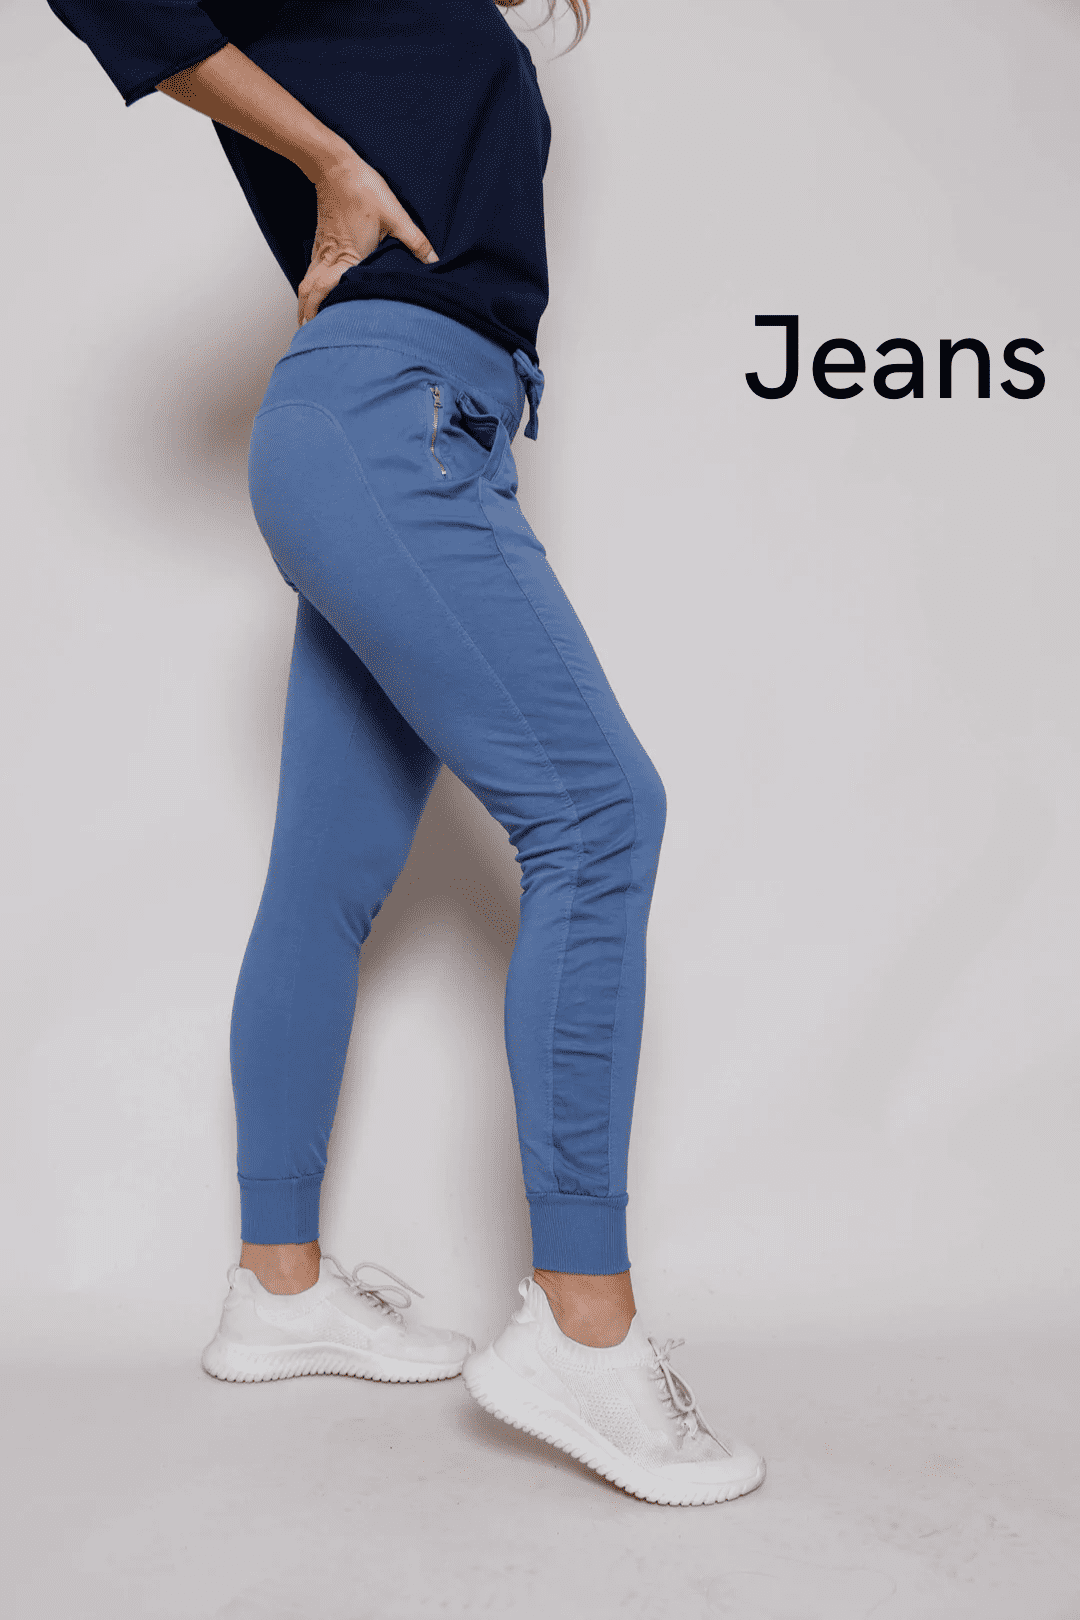 Jeans (1)